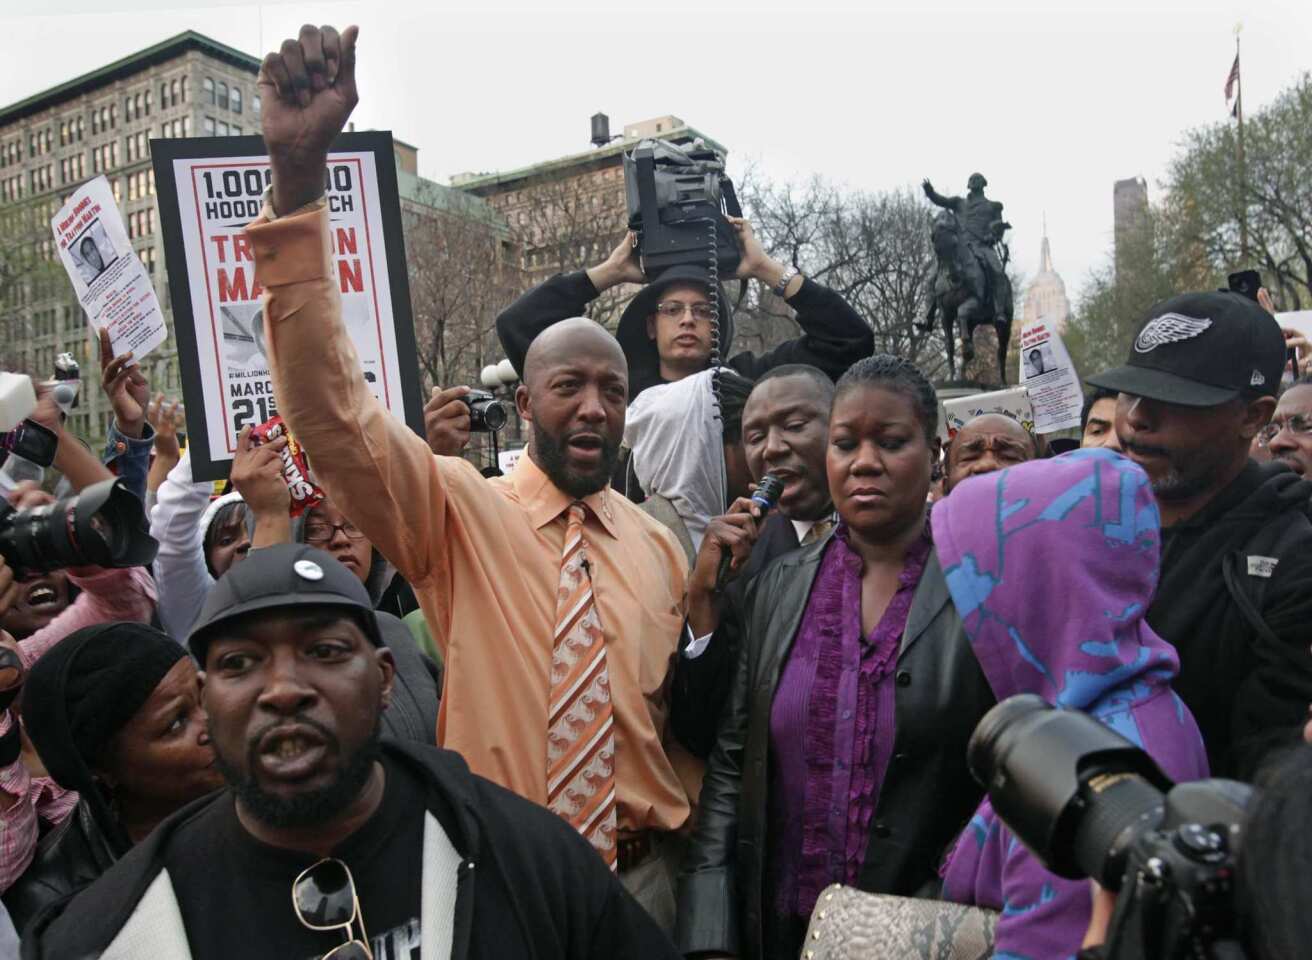 Trayvon Martin's parents take part in protest